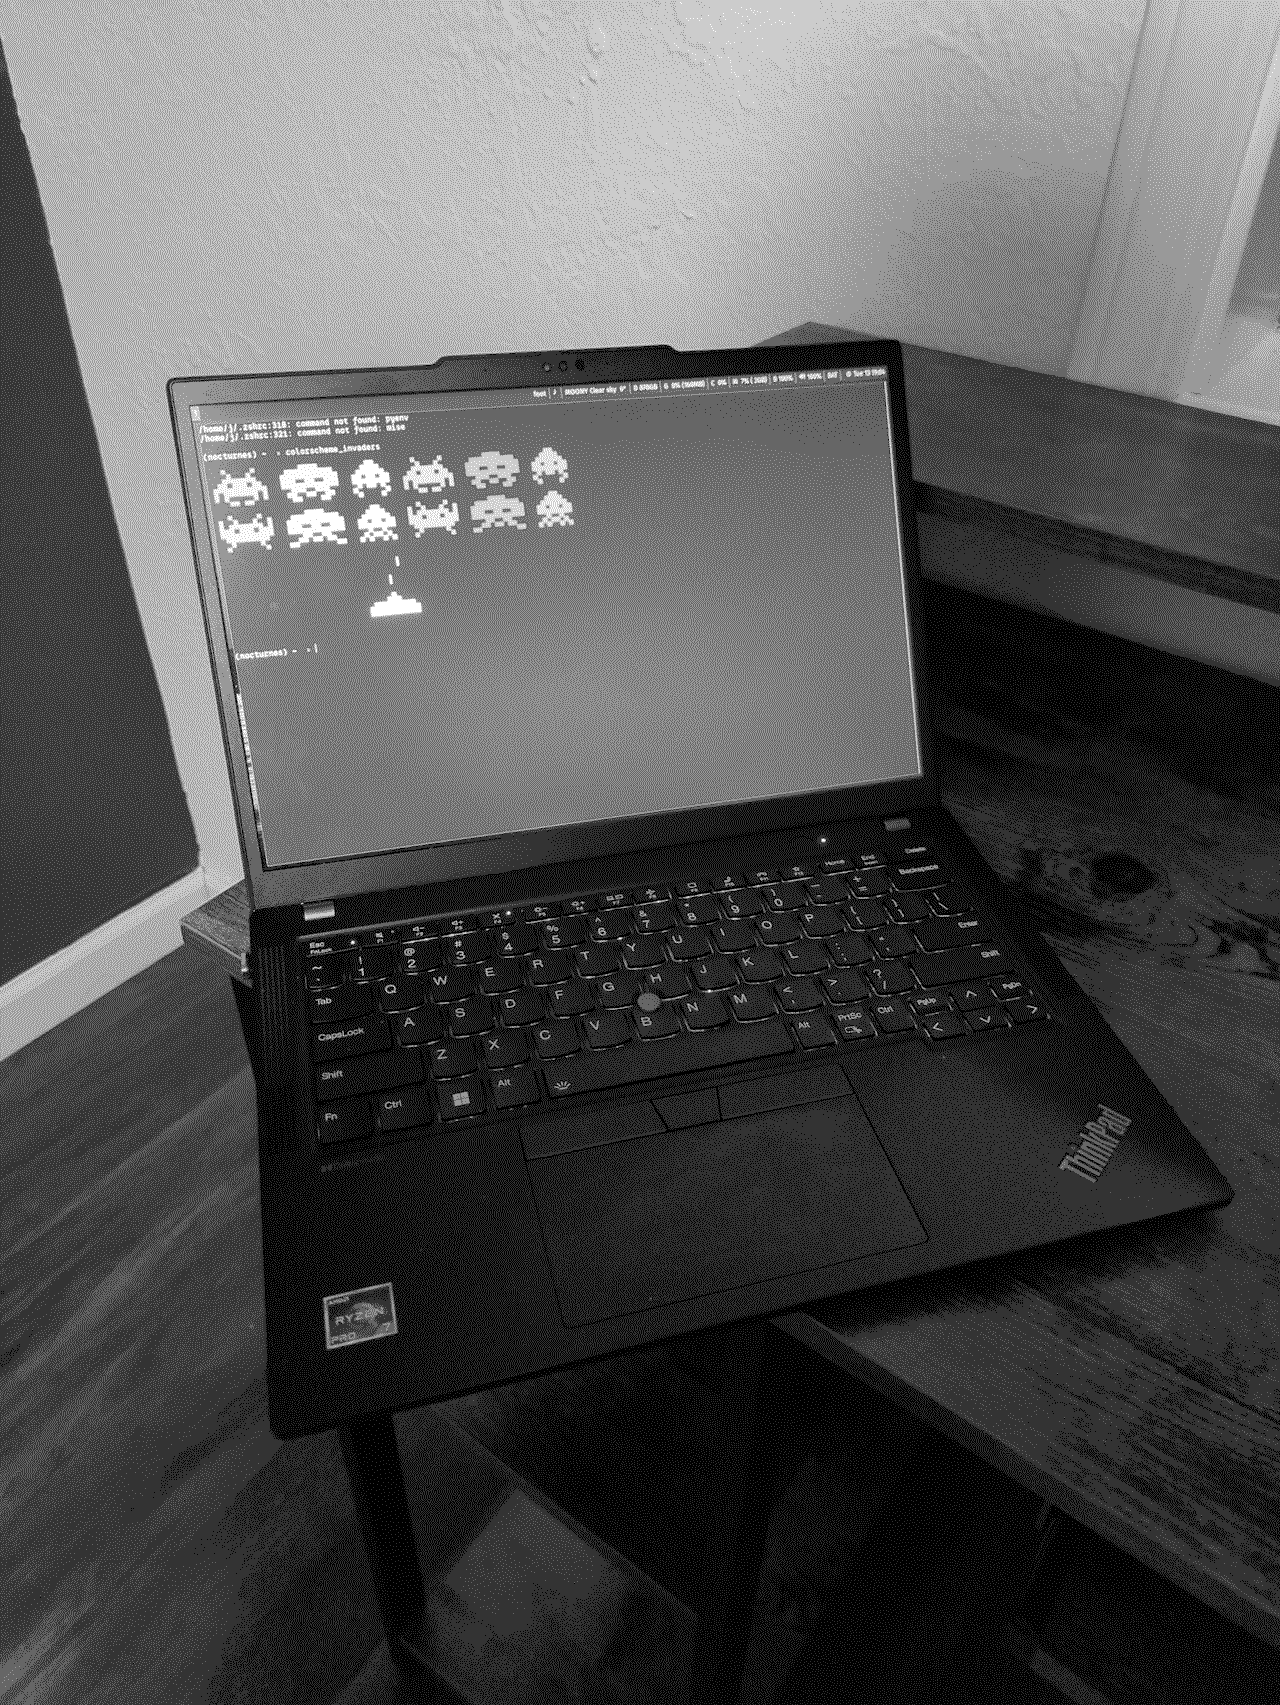 It's a Thinkpad... what did you think it was going to look
like?